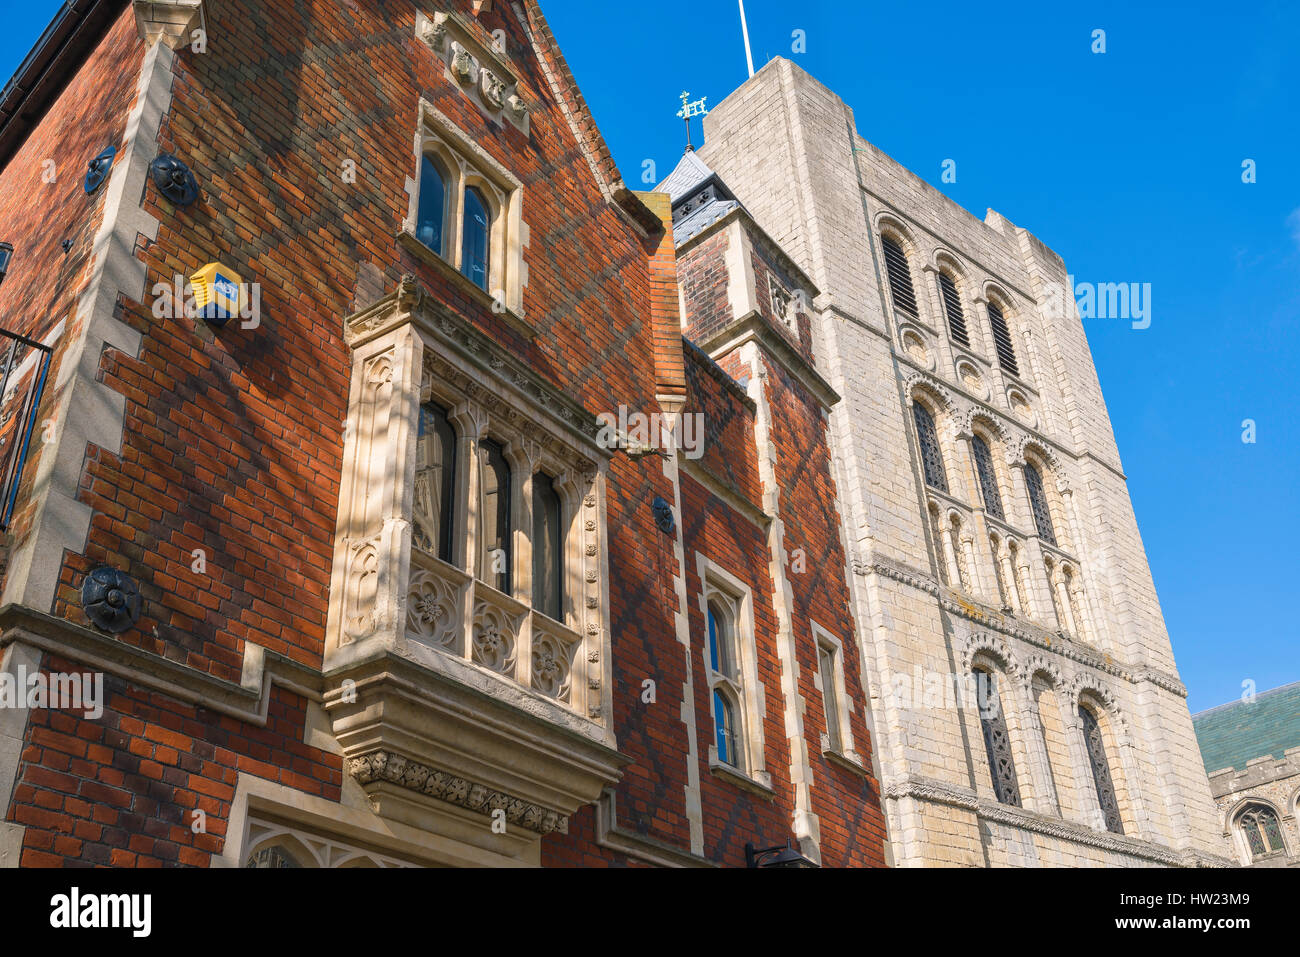 Suffolk architecture, the 'Tudor-Gothic' Savings Bank House(designed by  Lewis Nockalls Cottingham) and  11th century Norman tower, Bury St Edmunds. Stock Photo